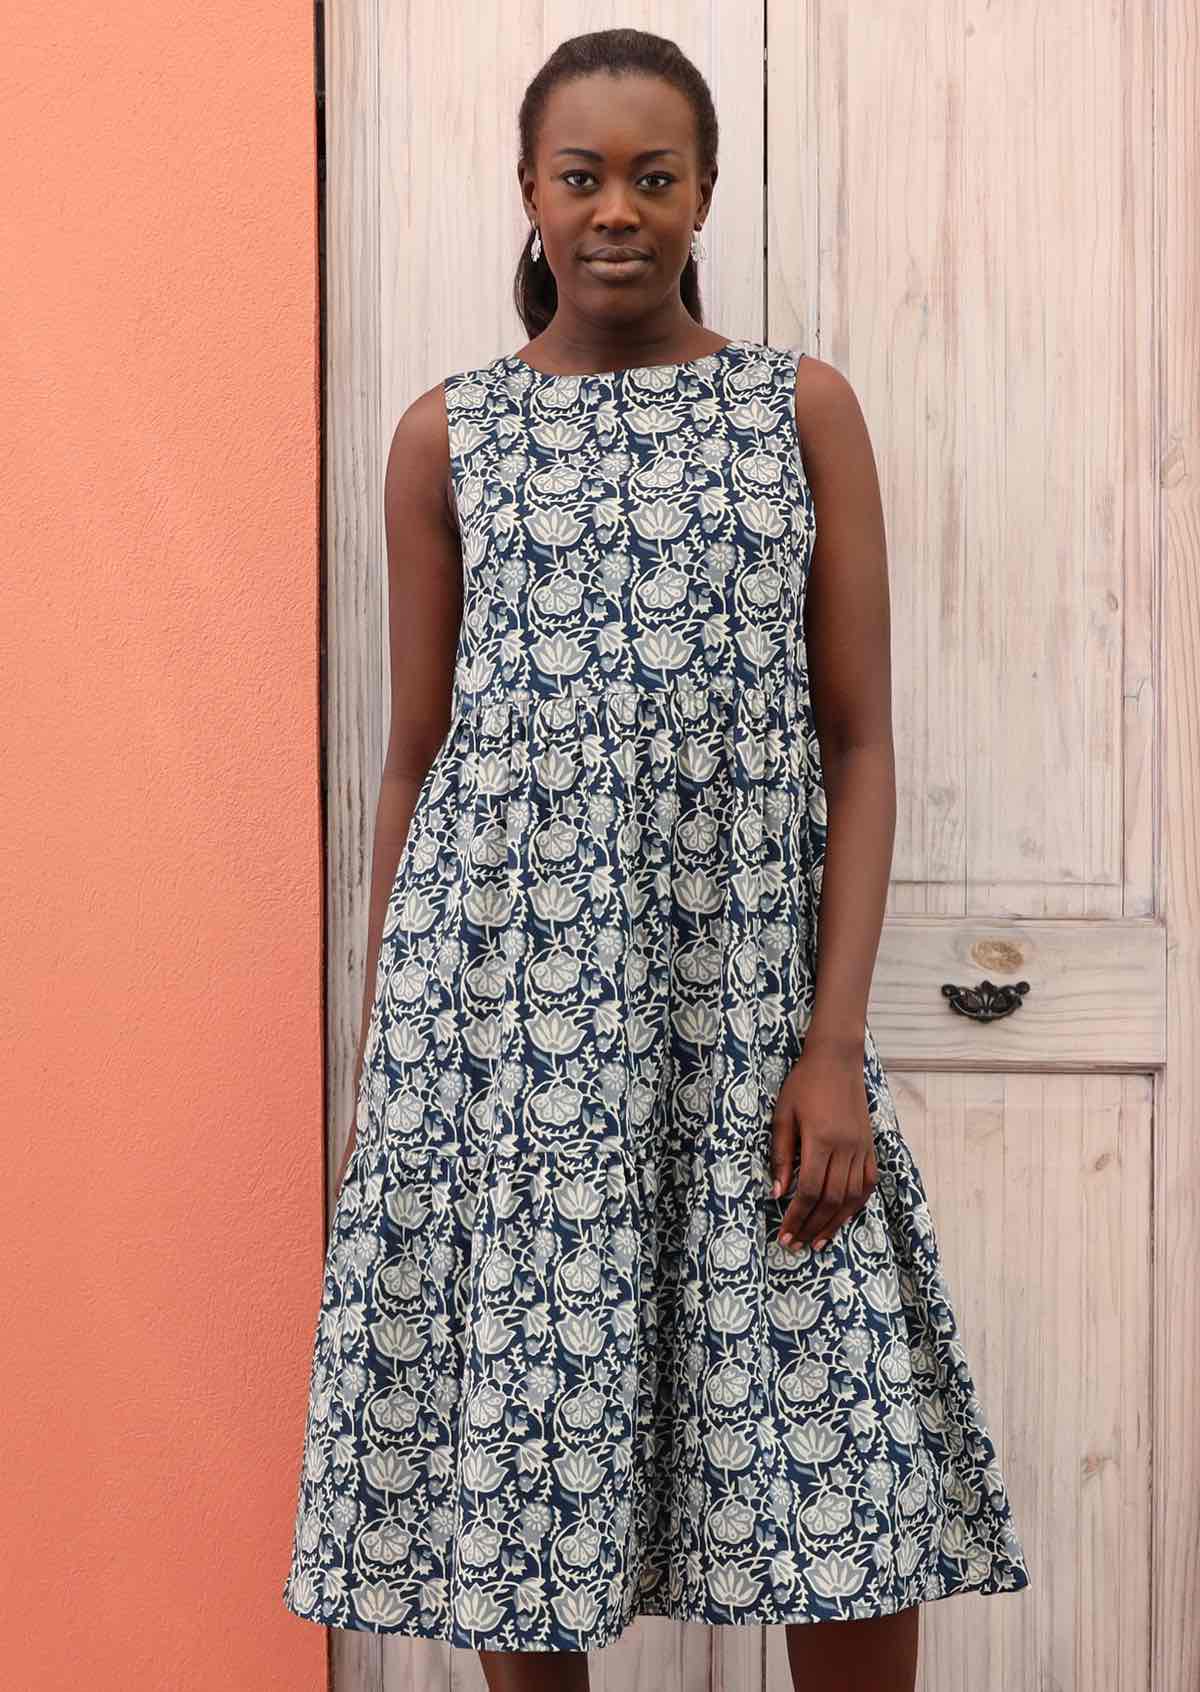 Model wears relaxed fit dress with a round neckline.